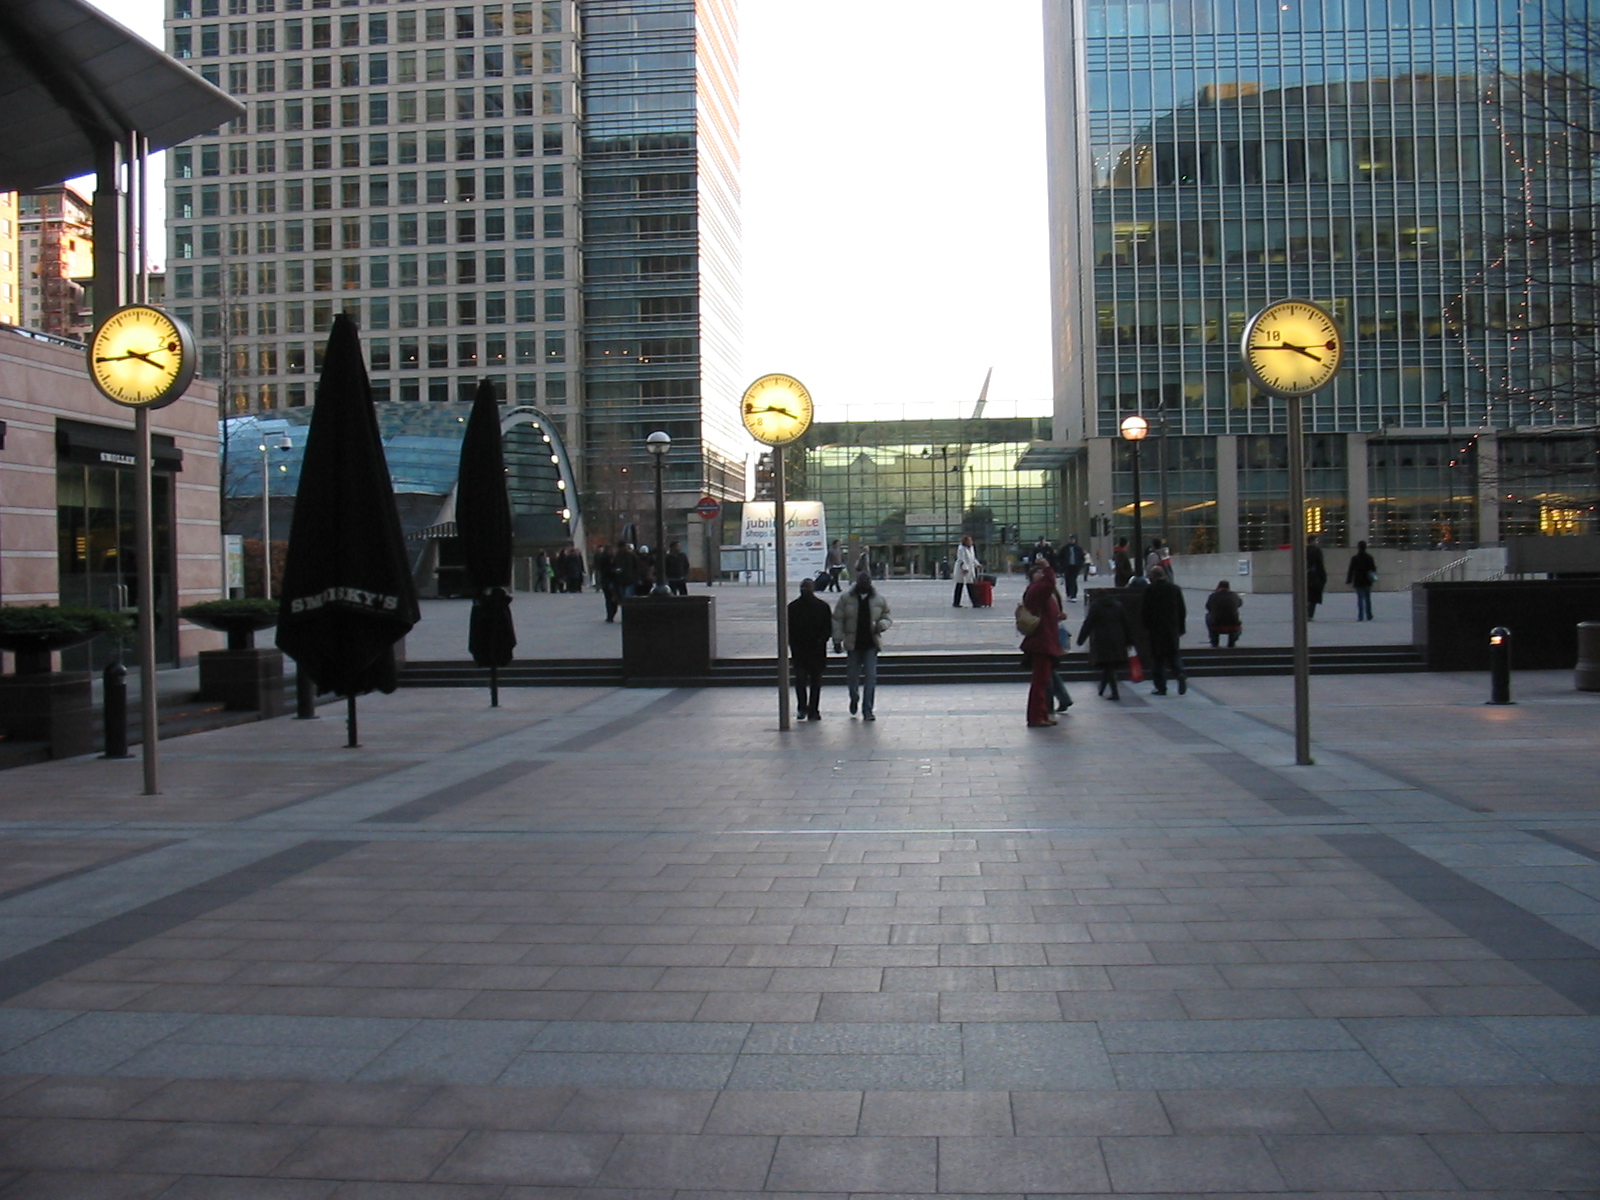 a city plaza at dusk with people walking around